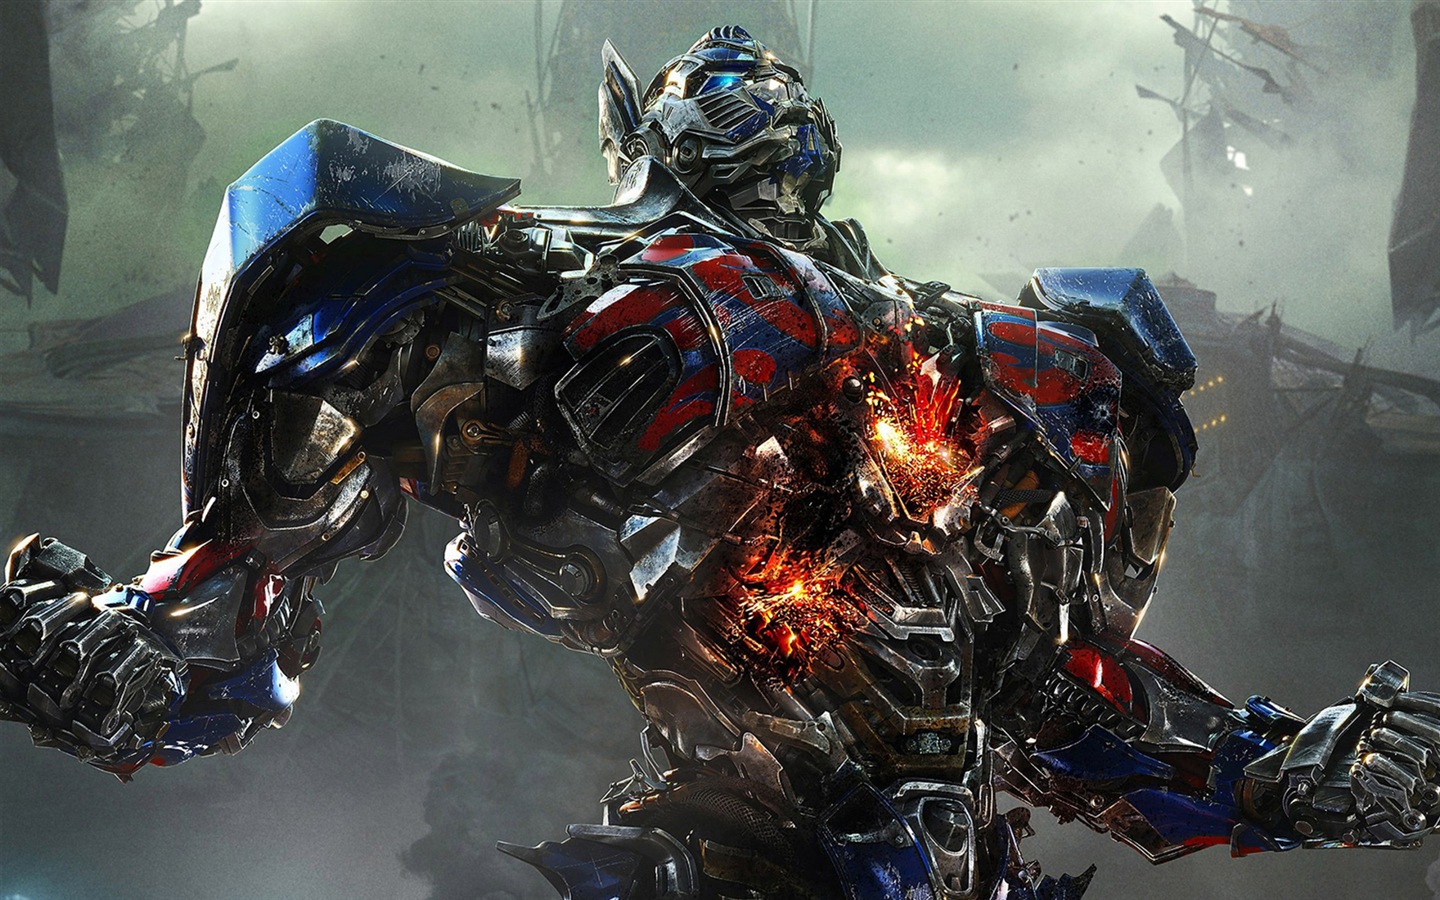 2014 Transformers: Age of Extinction HD tapety #5 - 1440x900